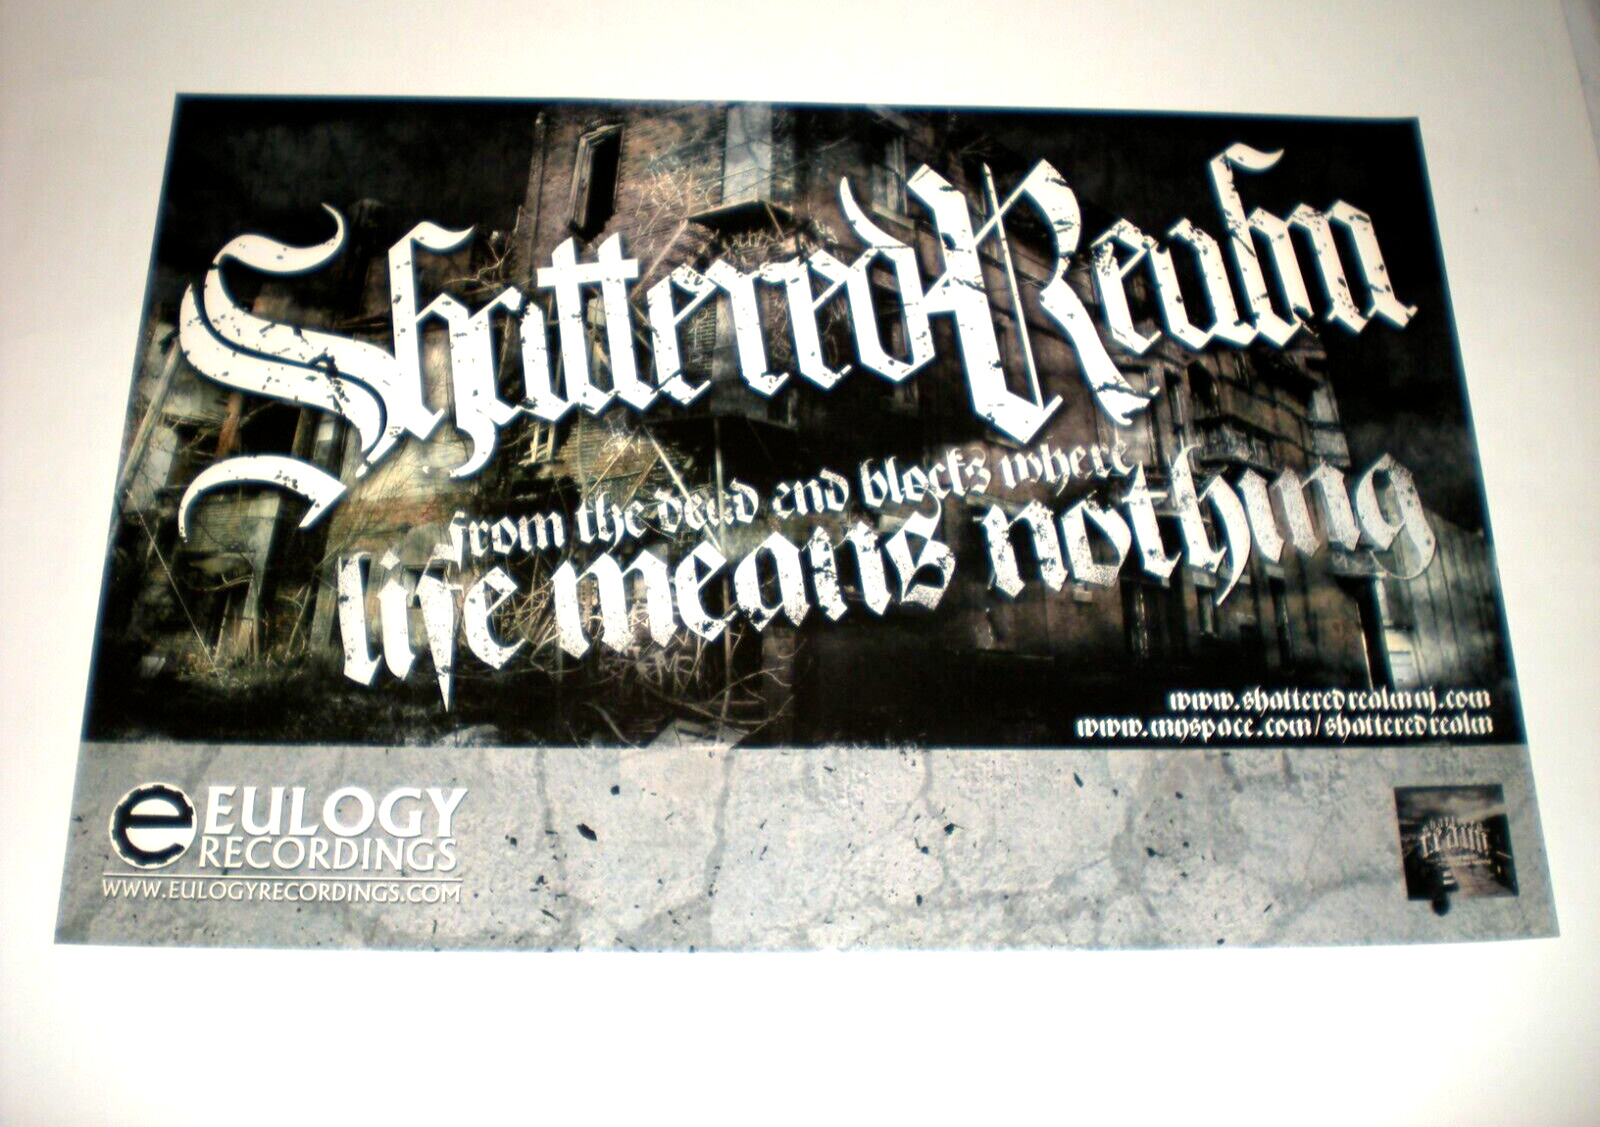 POSTER by Shattered Realm from the dead end blocks where life means nothing band